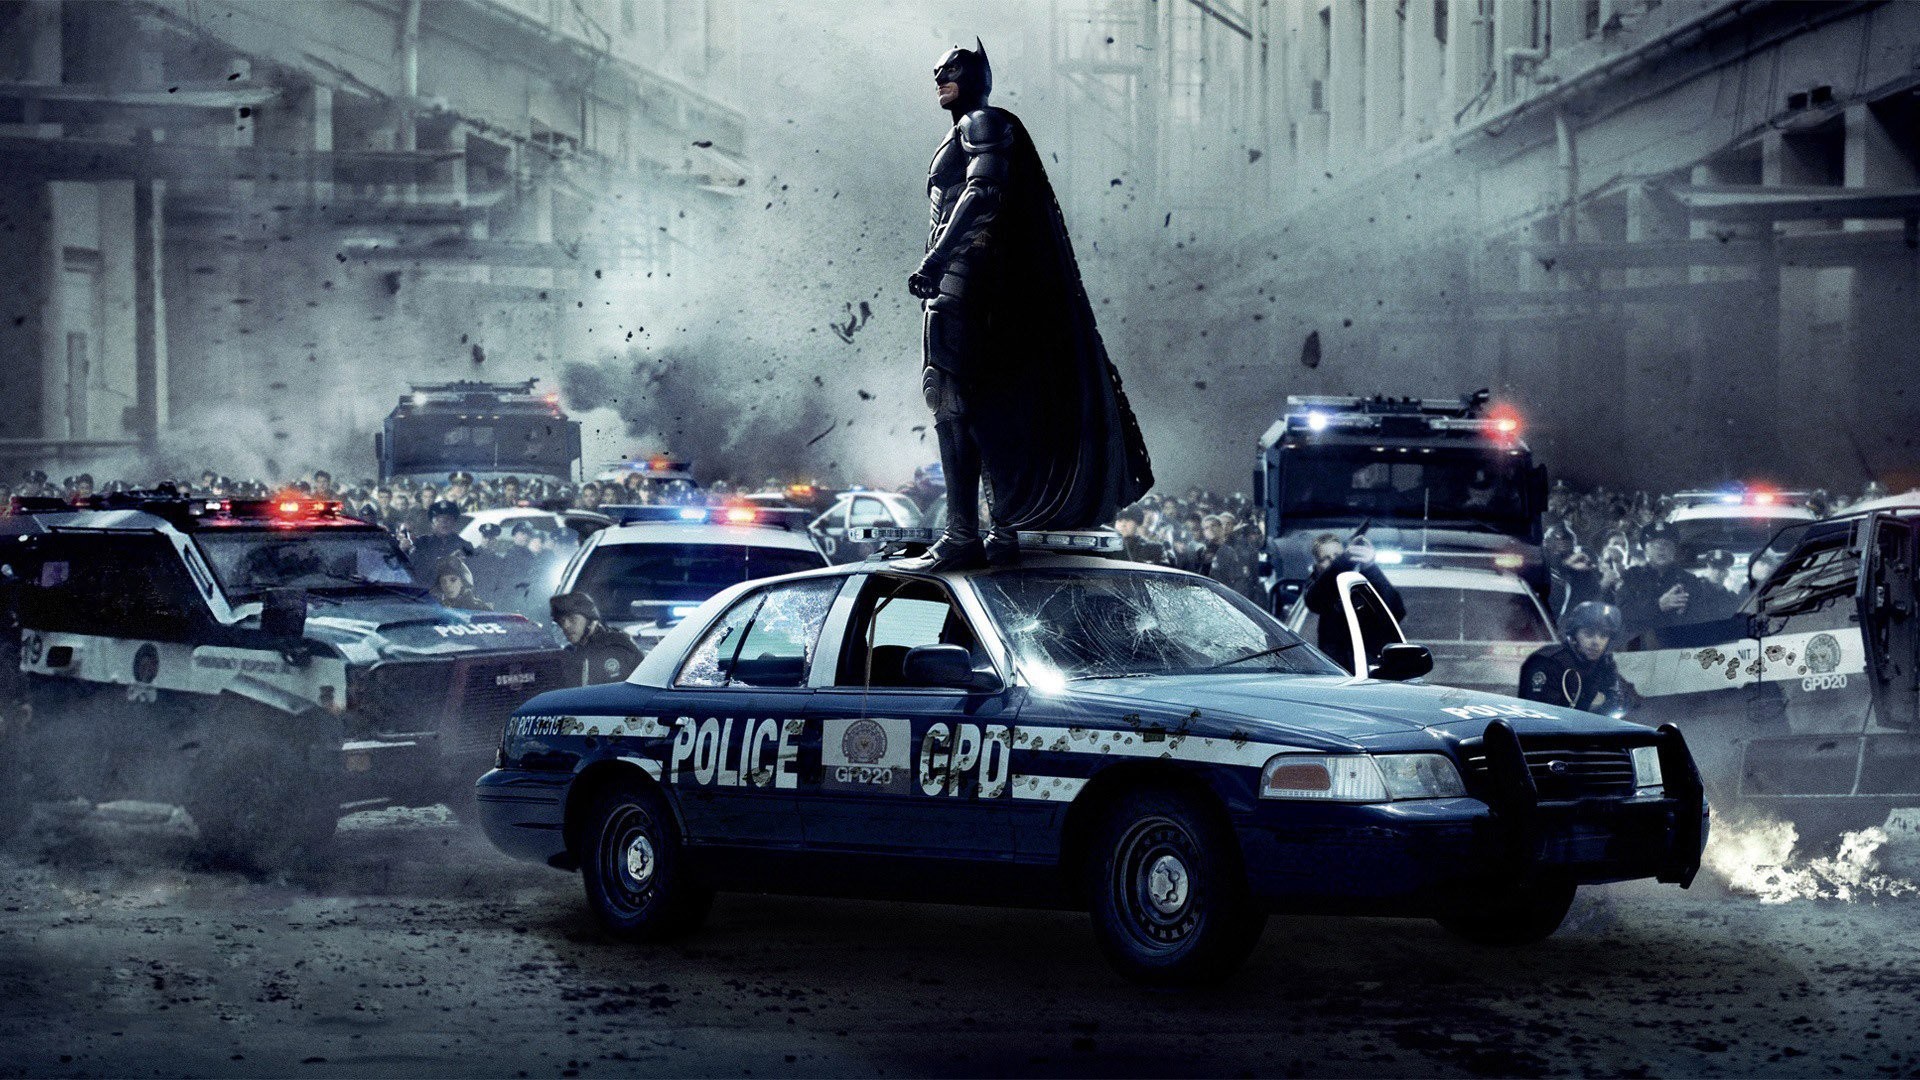 1920x1080 0 1280x800 Awesome Police Wallpaper Full HD Pictures  Batman The  Dark Knight Rises Wallpaper Hd Wallpaper